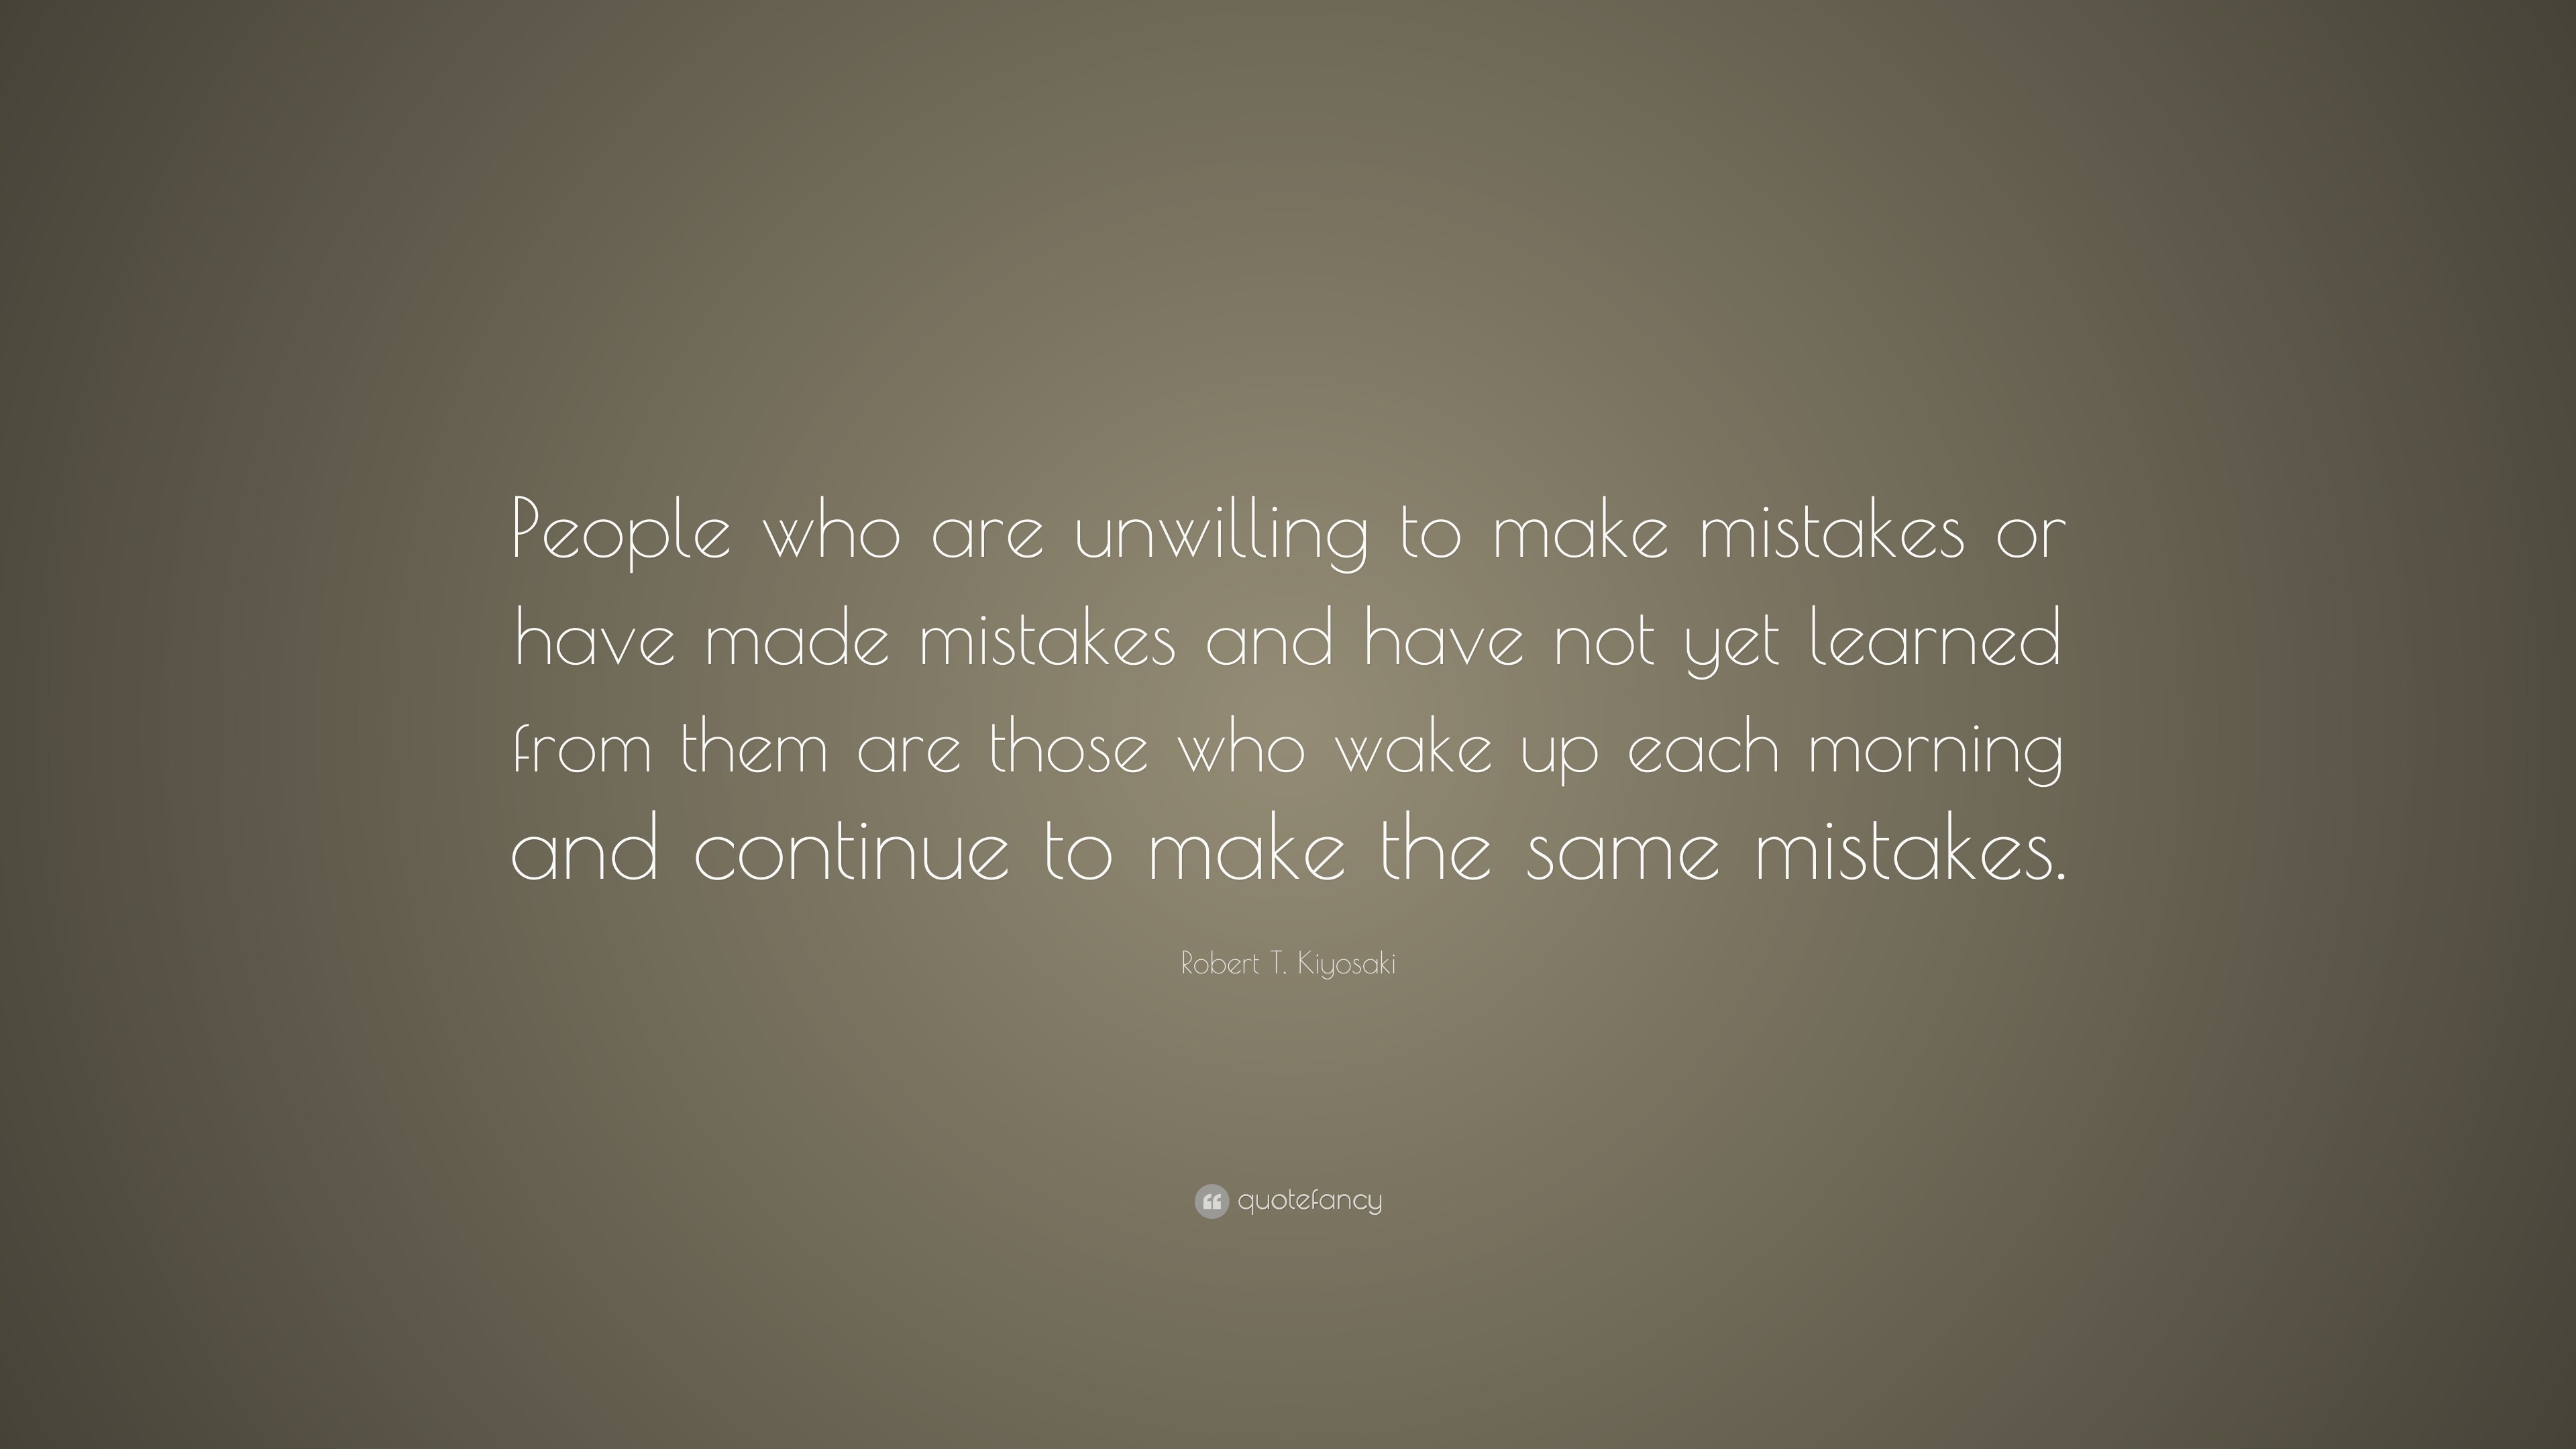 Robert T. Kiyosaki Quote: “People who are unwilling to make mistakes or ...